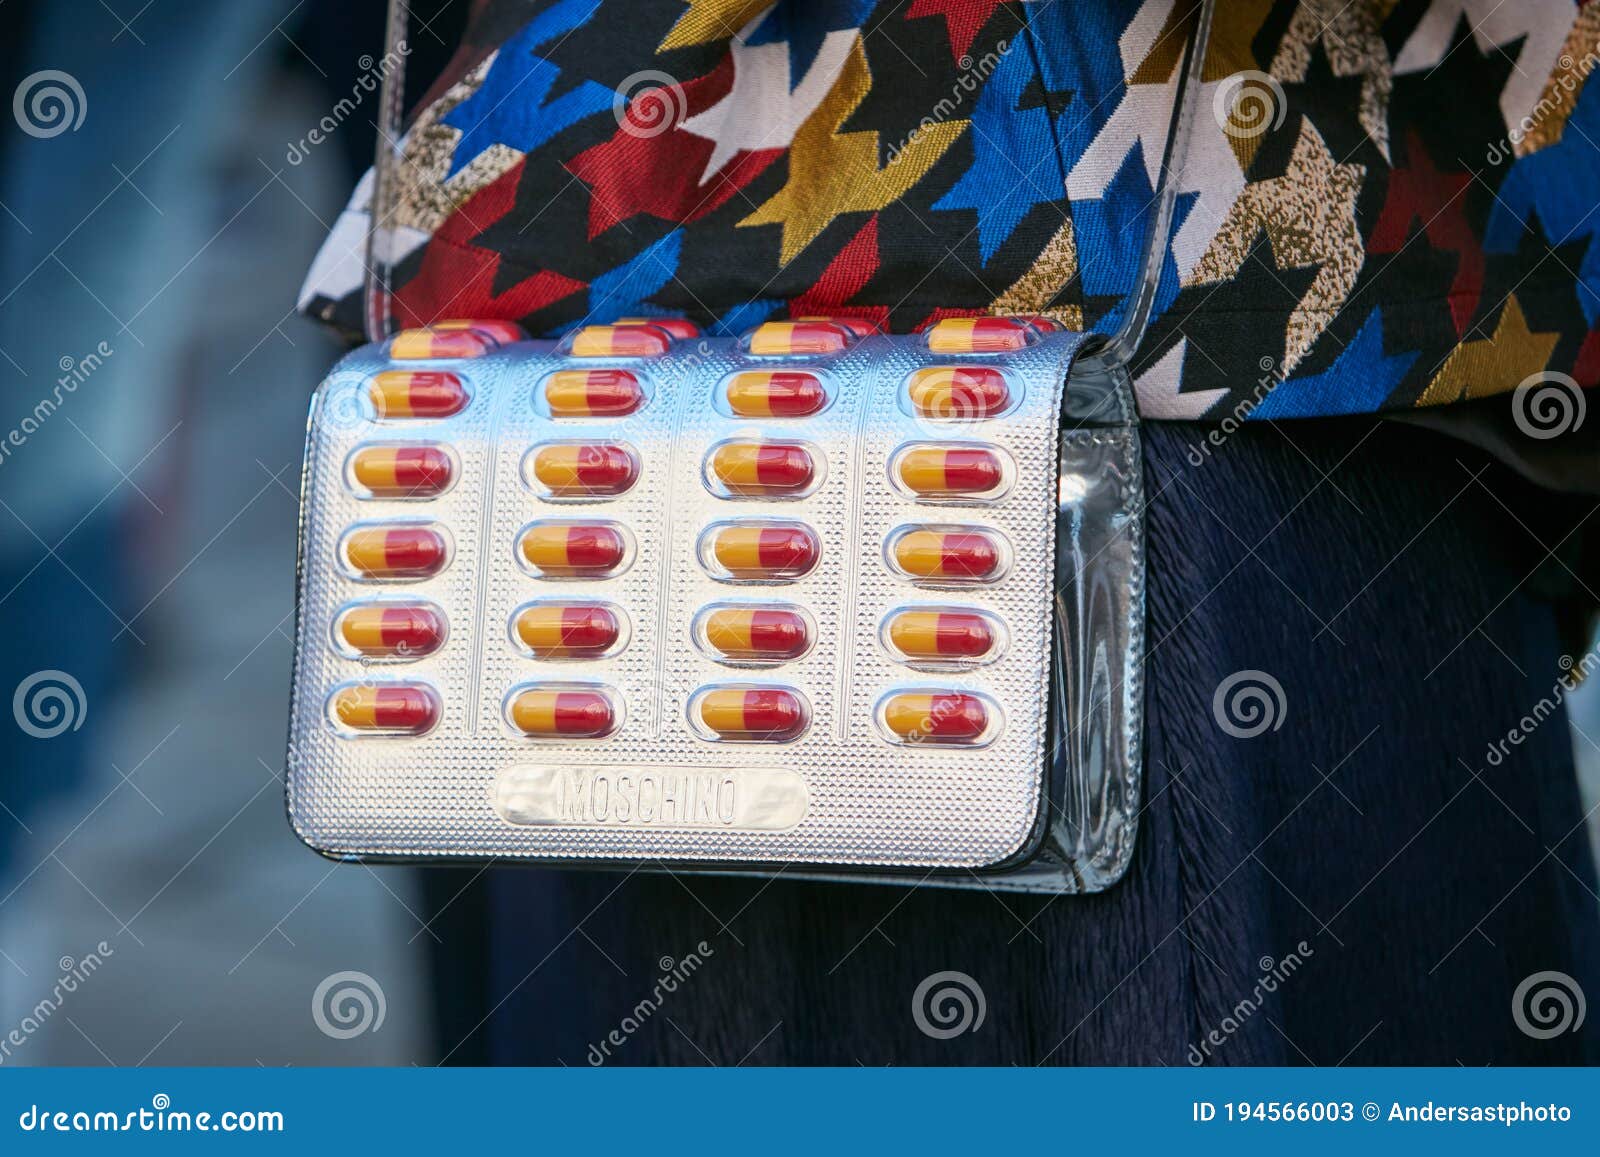 Woman with Silver Moschino Bag with Yellow and Red Capsule Medicines before  Max Mara Fashion Show, Milan Editorial Stock Photo - Image of woman,  people: 194566003